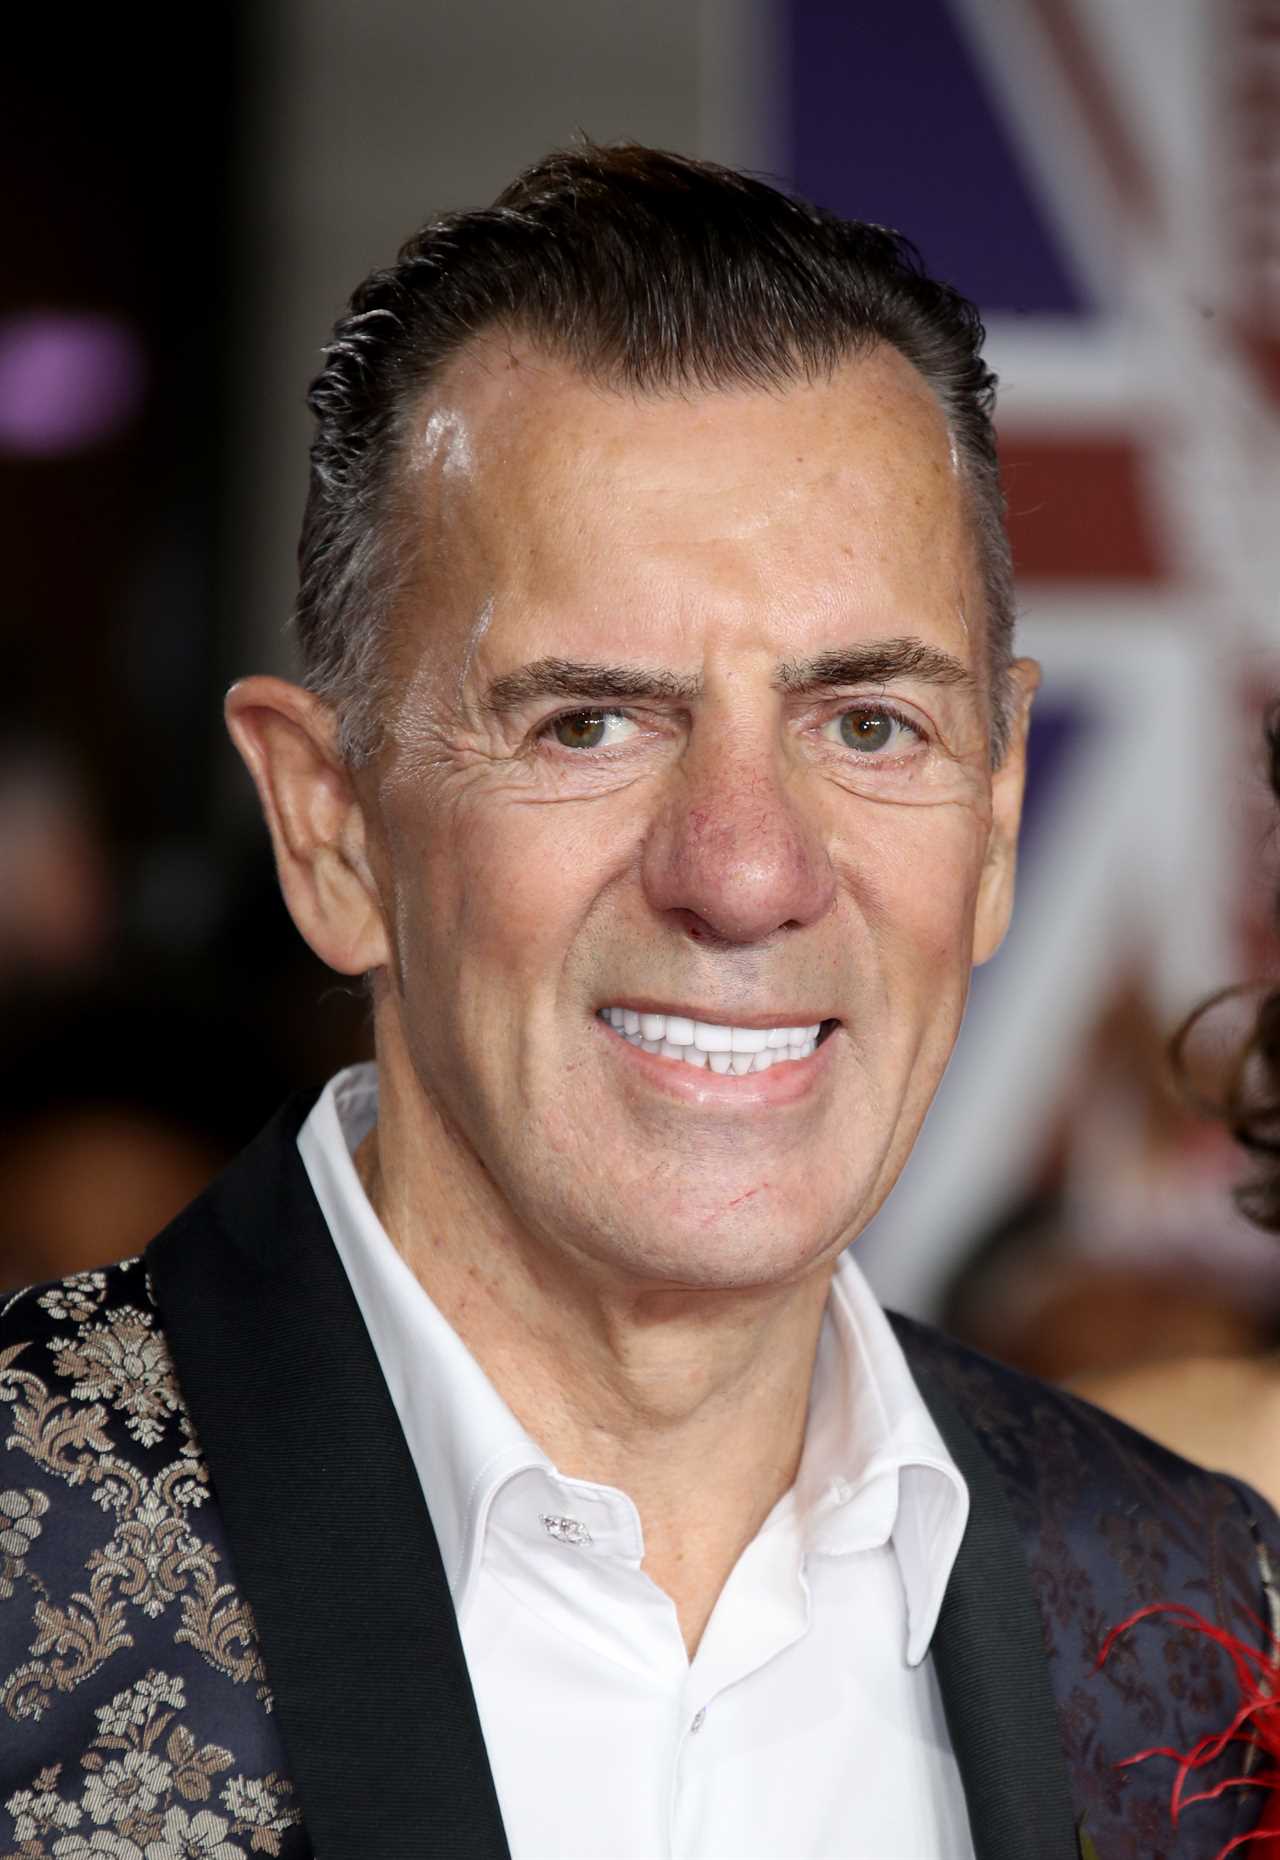 Duncan Bannatyne reveals near-death experience after dragonfly bite